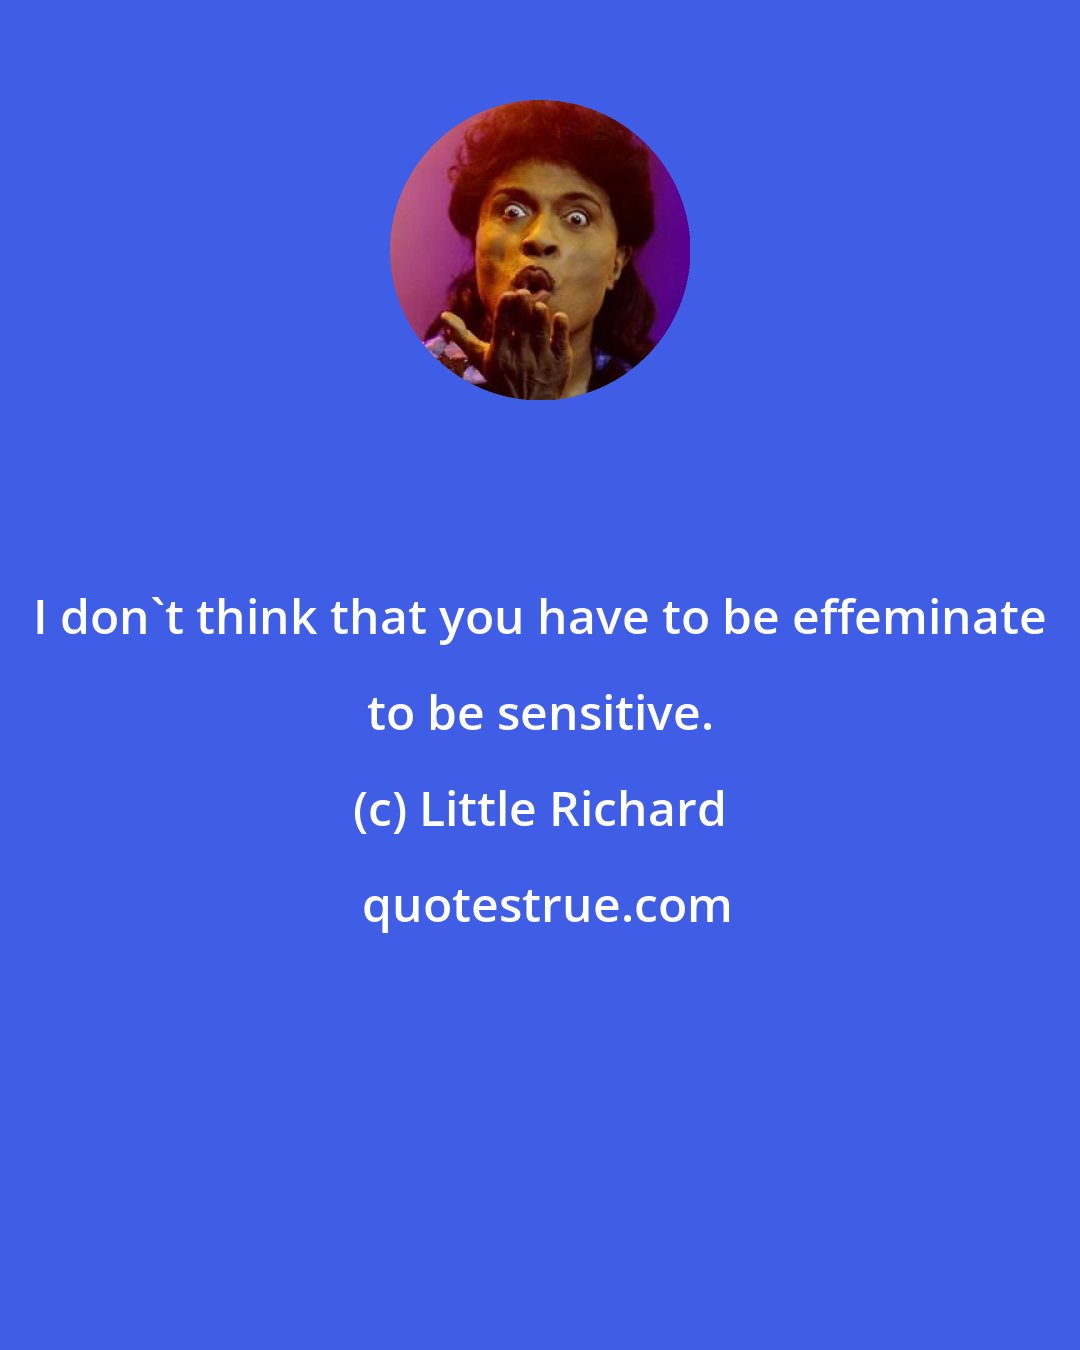 Little Richard: I don't think that you have to be effeminate to be sensitive.